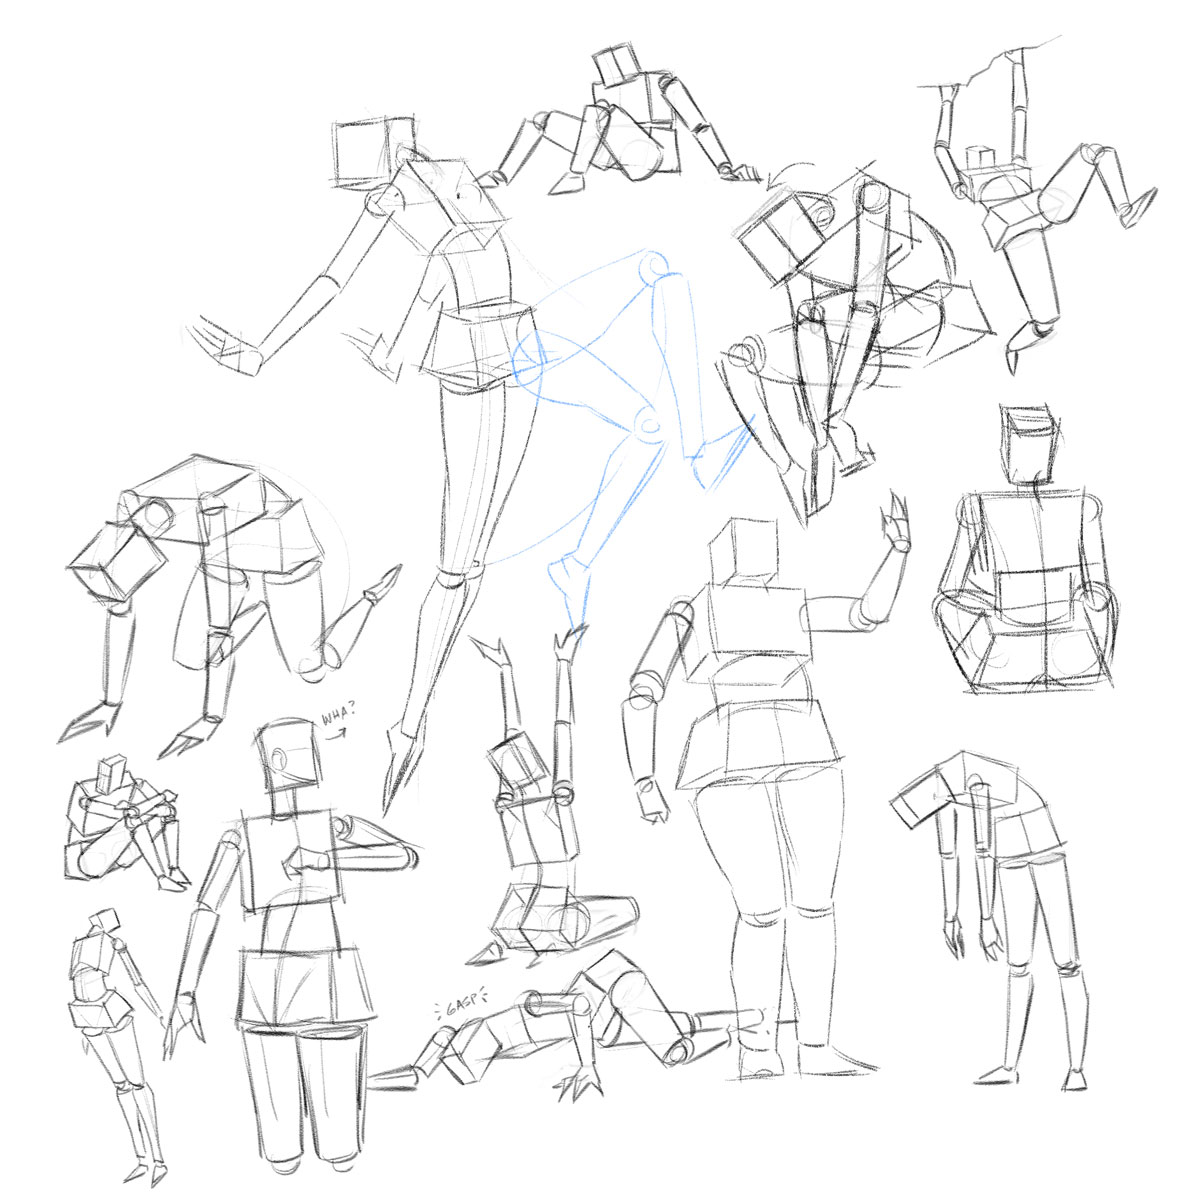 Why You Should Start with Armatures When Learning to Draw Figures